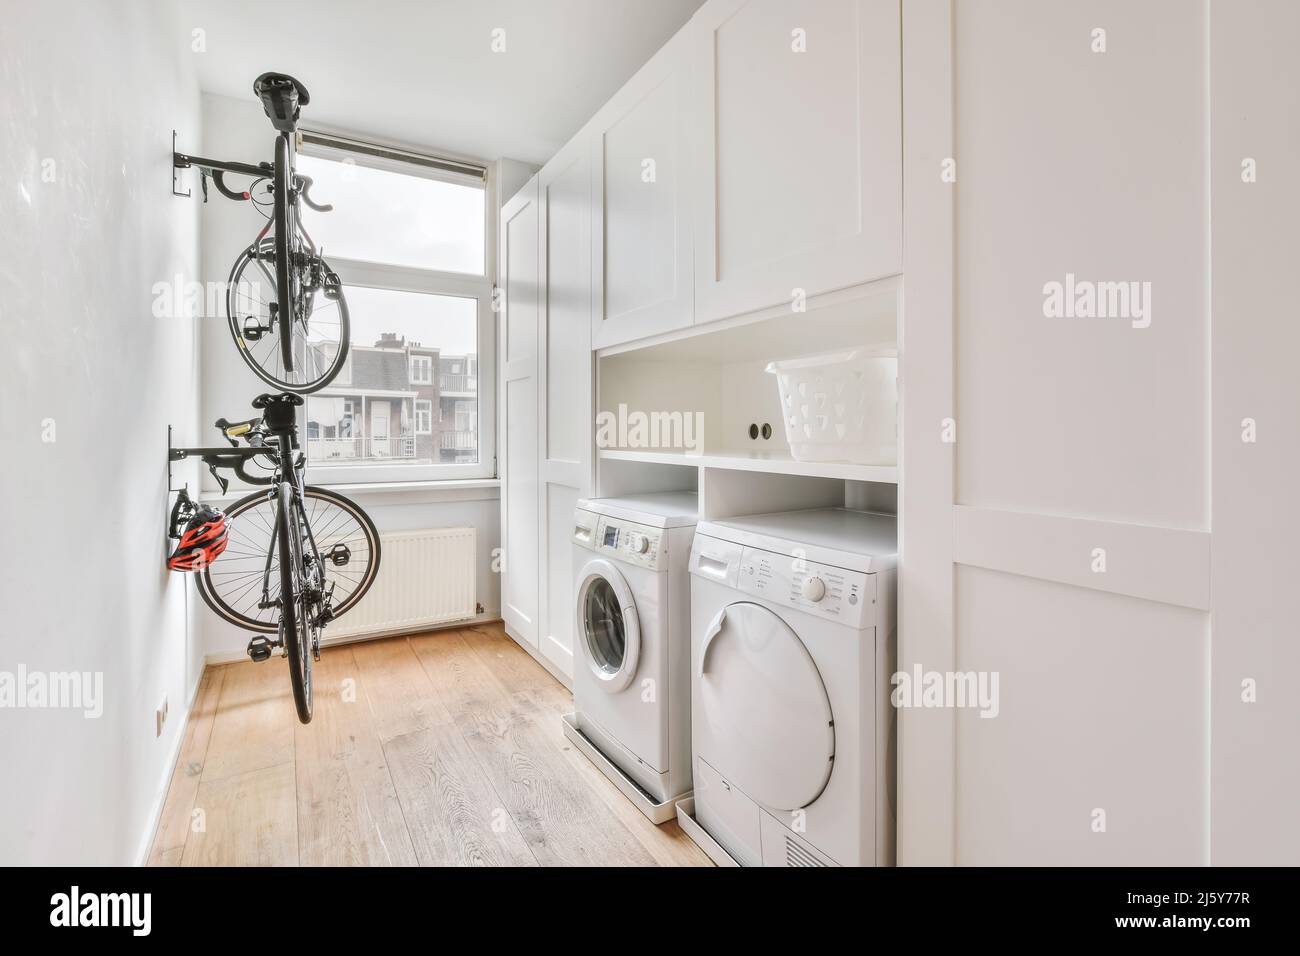 Modern white electric washing and dryer machines placed near white cabinets and basket in light laundry room with window and bicycle Stock Photo